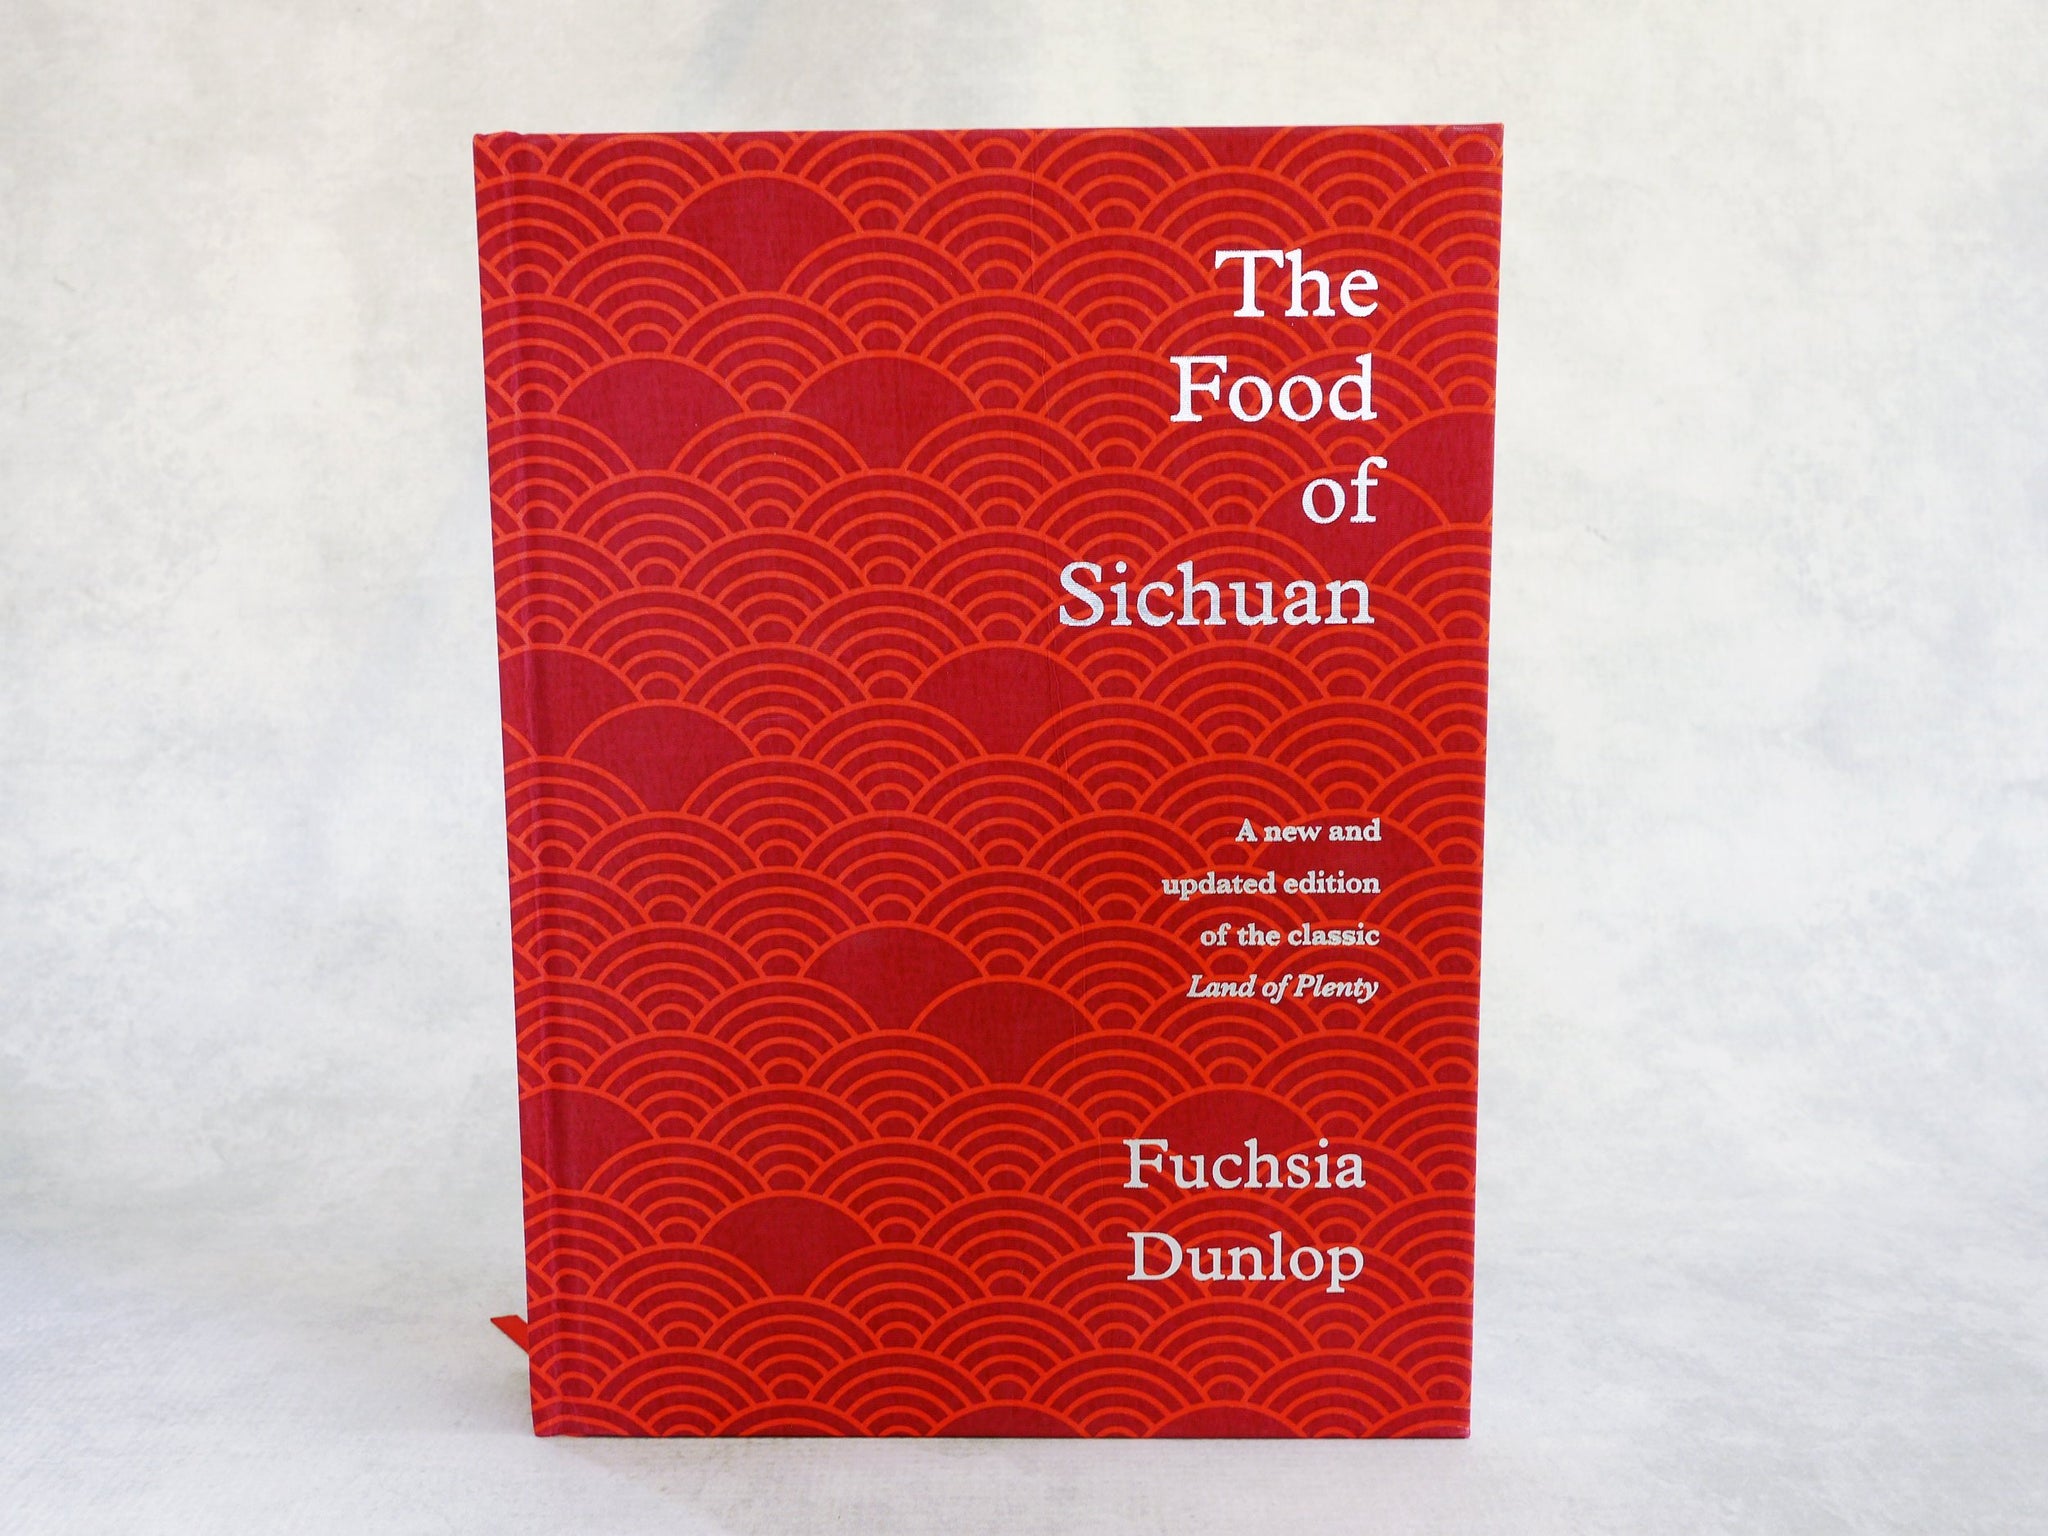 The Food of Sichuan (New Cookbook by Fuchsia Dunlop)